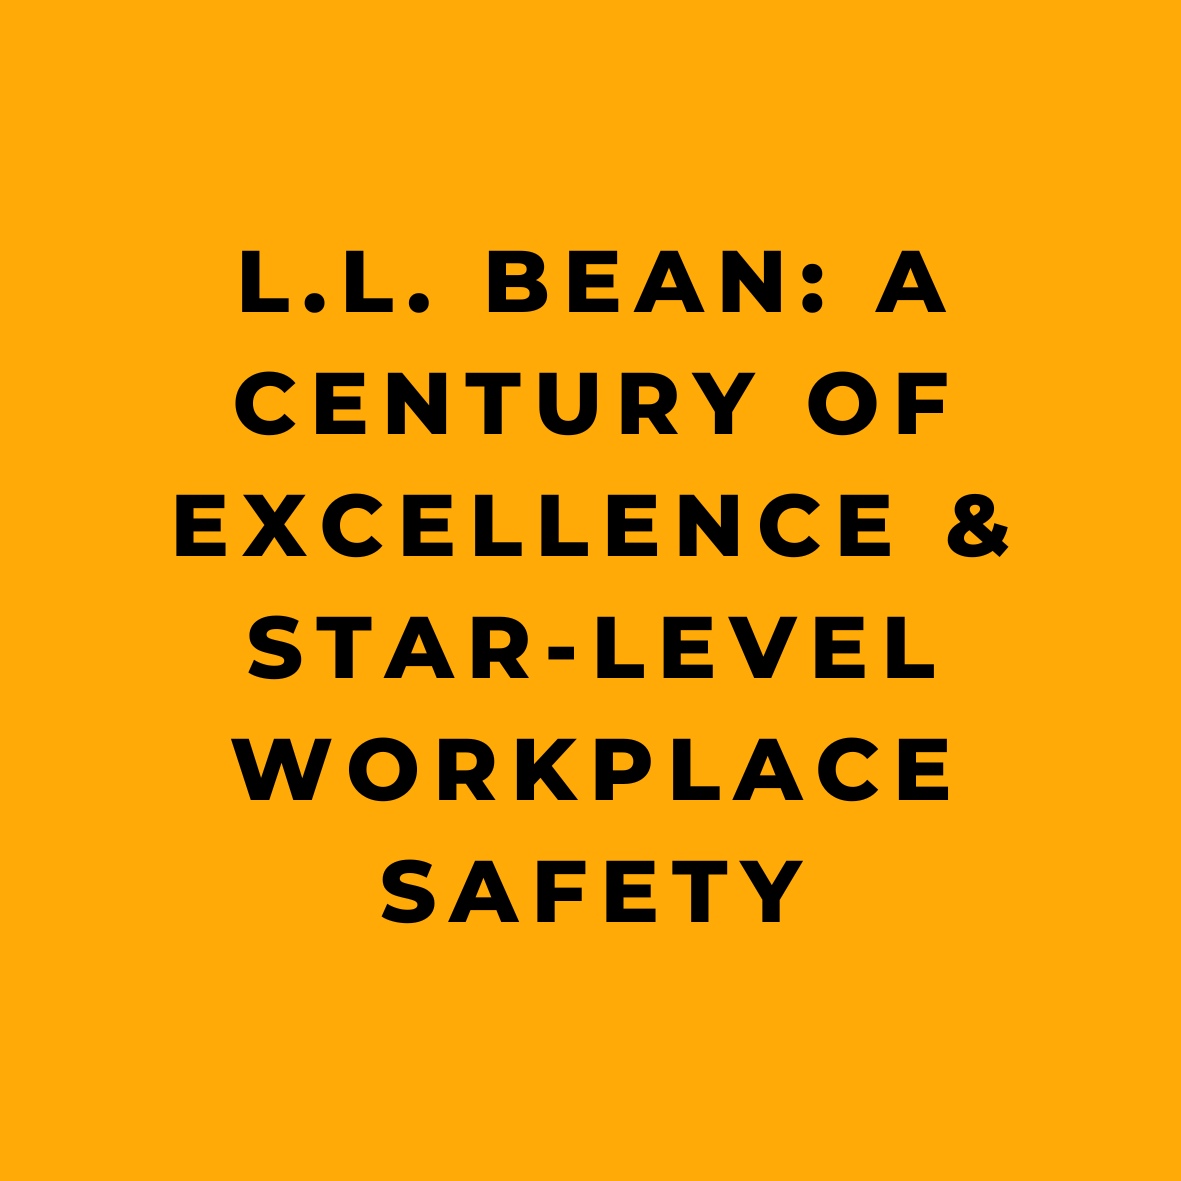 L.L. Bean A Century of Excellence & Star-Level Workplace Safety